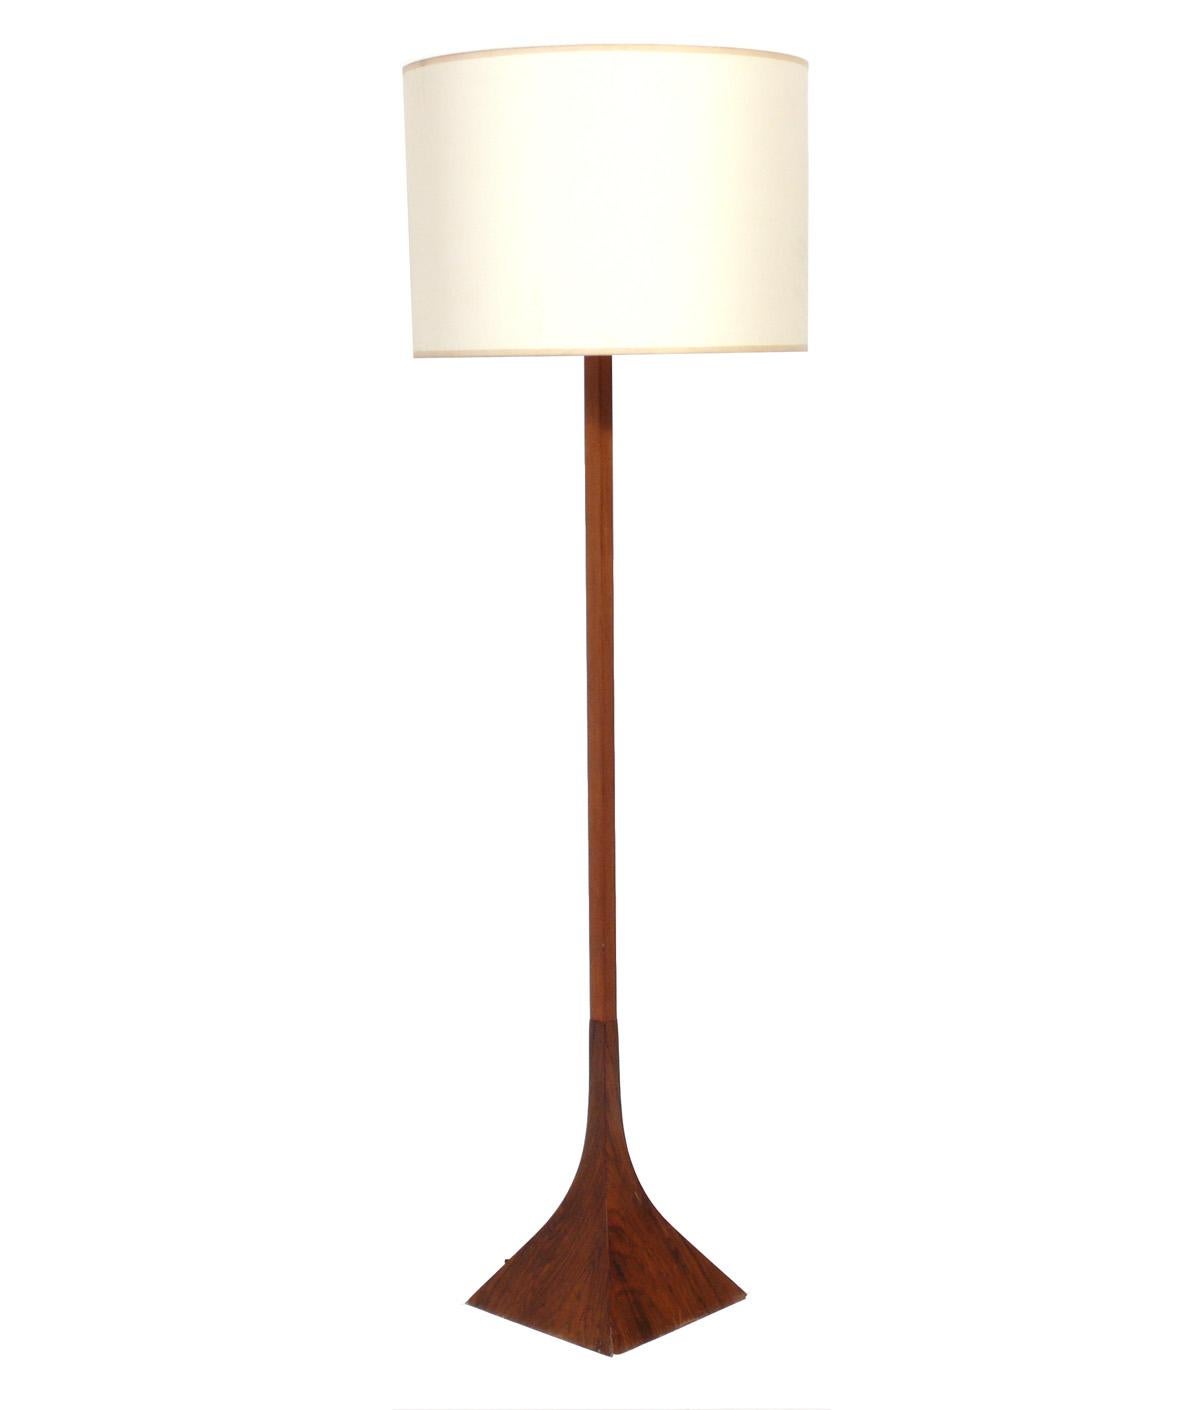 Sculptural Faux rosewood metal floor lamp, made by The Laurel Lamp Company, American, circa 1960s. It has been rewired and is ready to use. The price noted includes the shade.